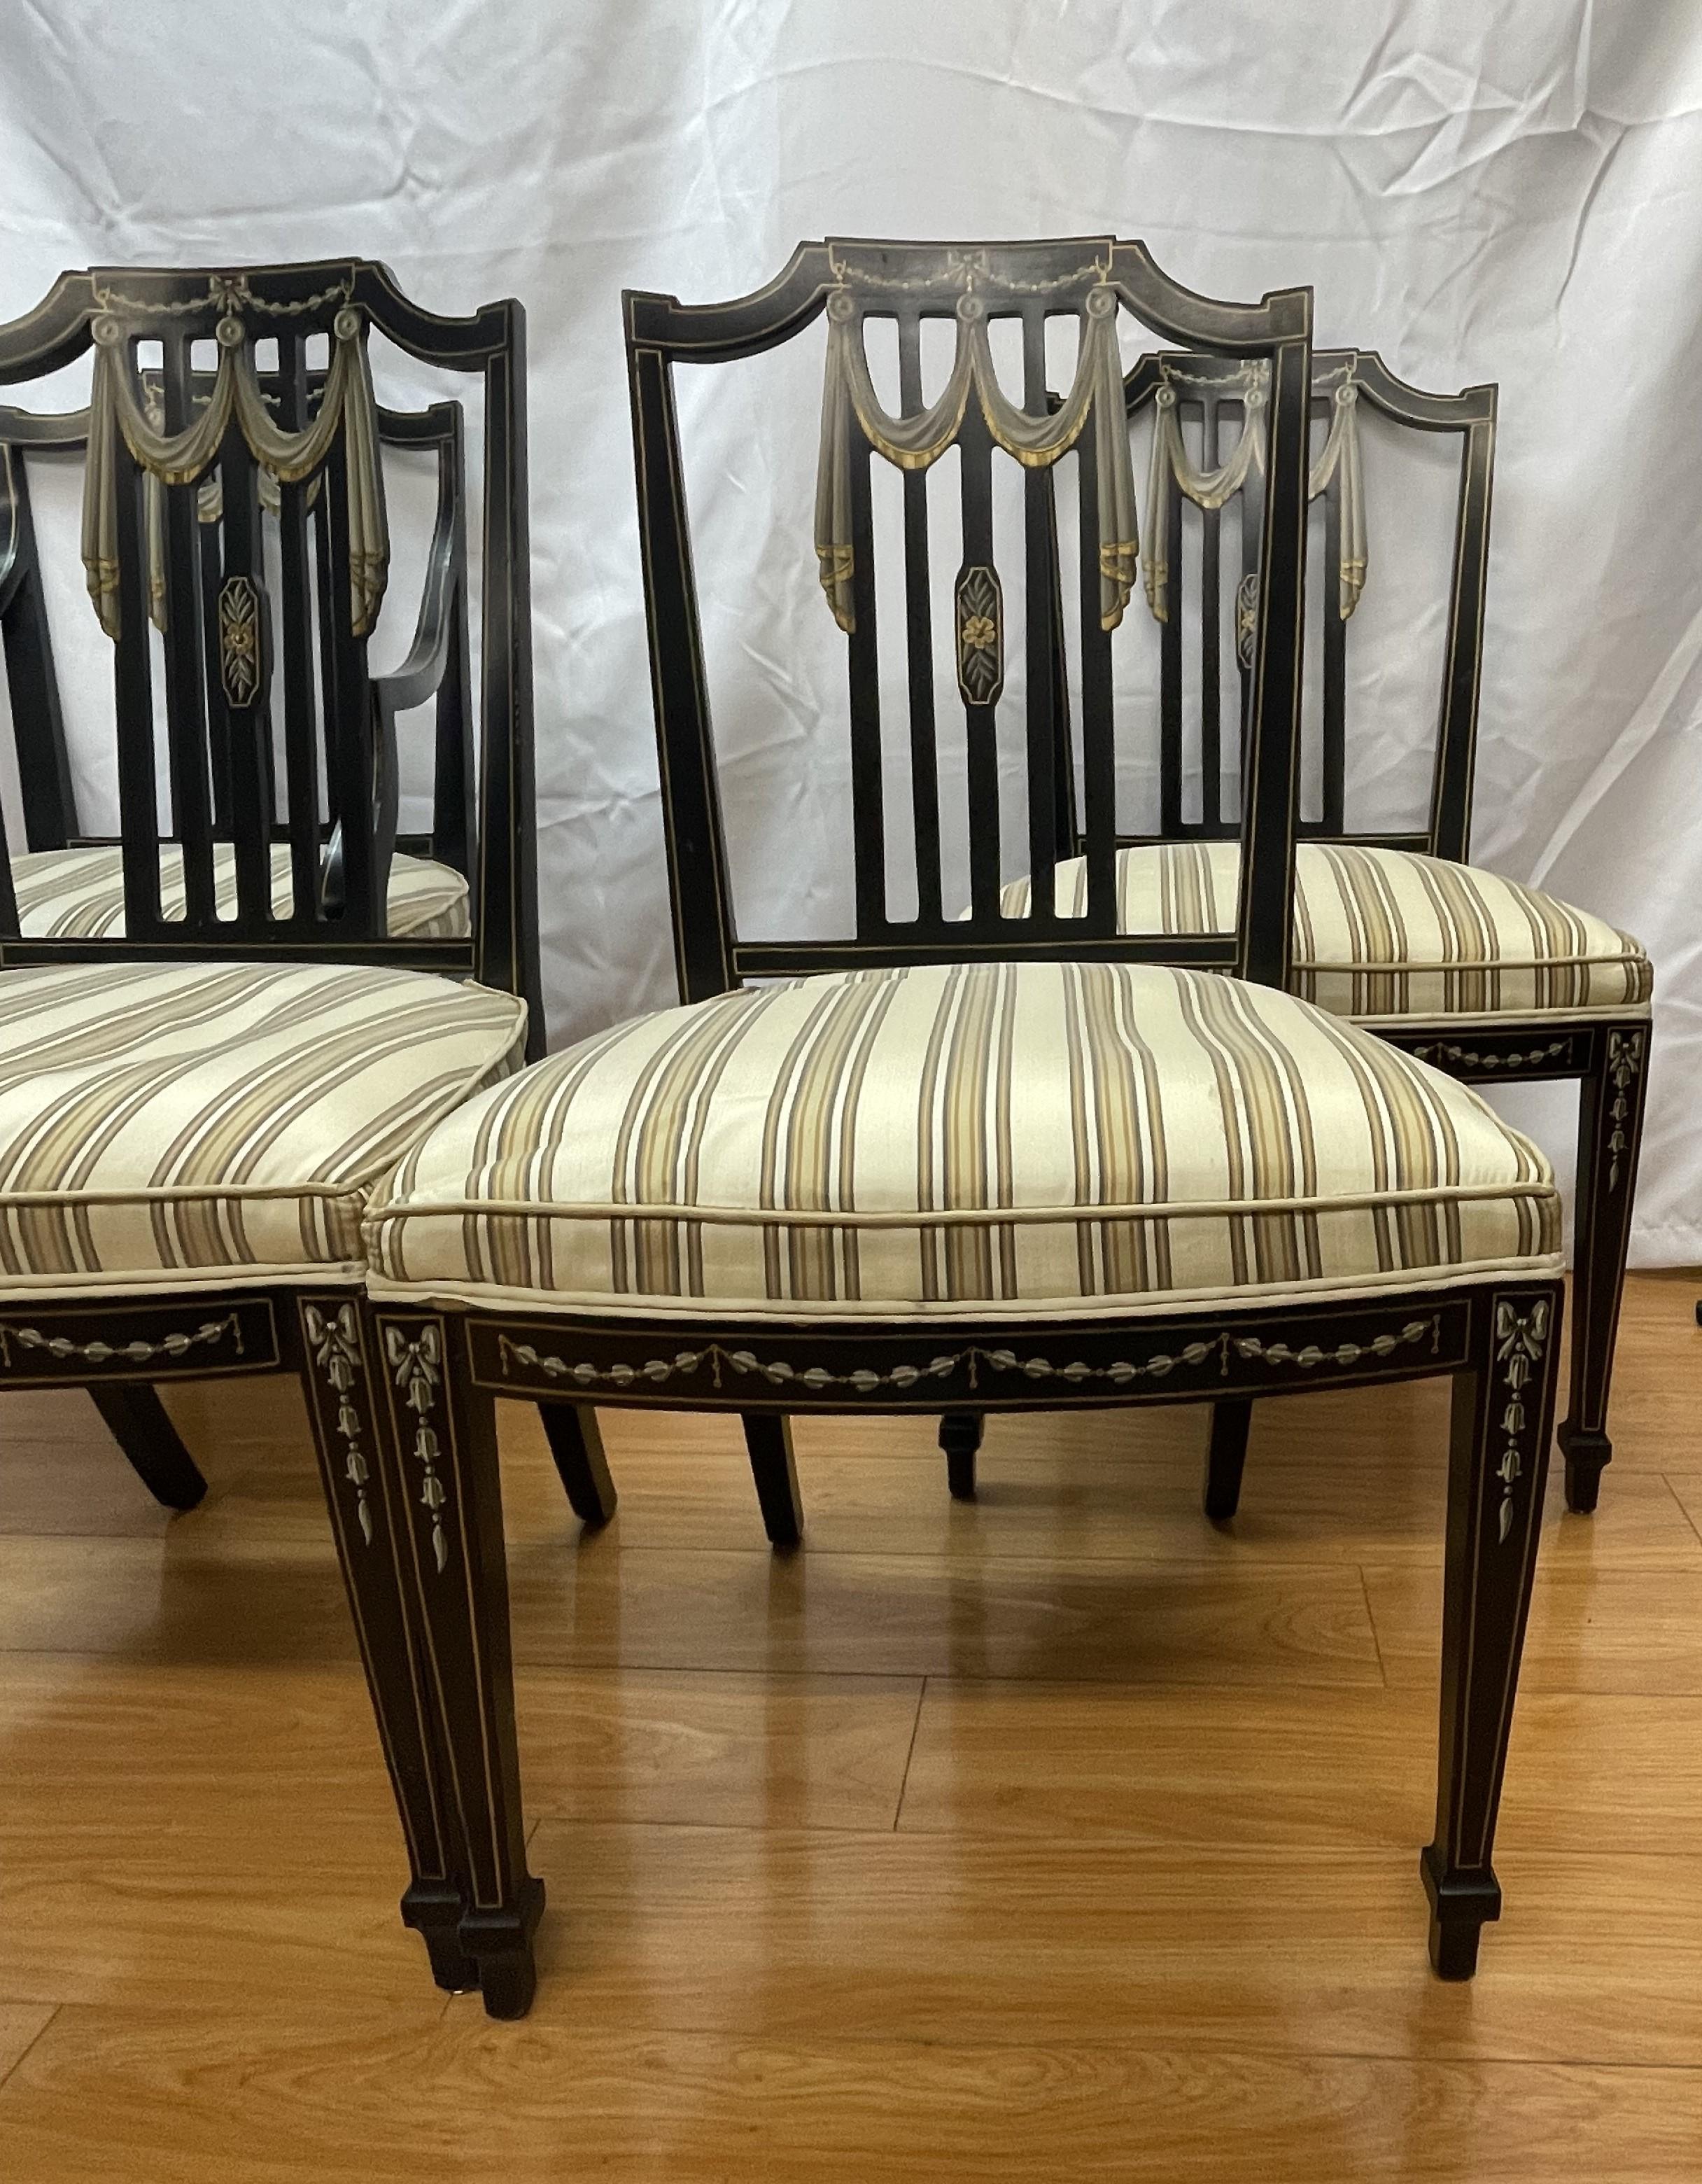 Four Sheraton chairs

Three side one arm handpainted ribbon decoration

Mid 20th century

22 x 18 x 36